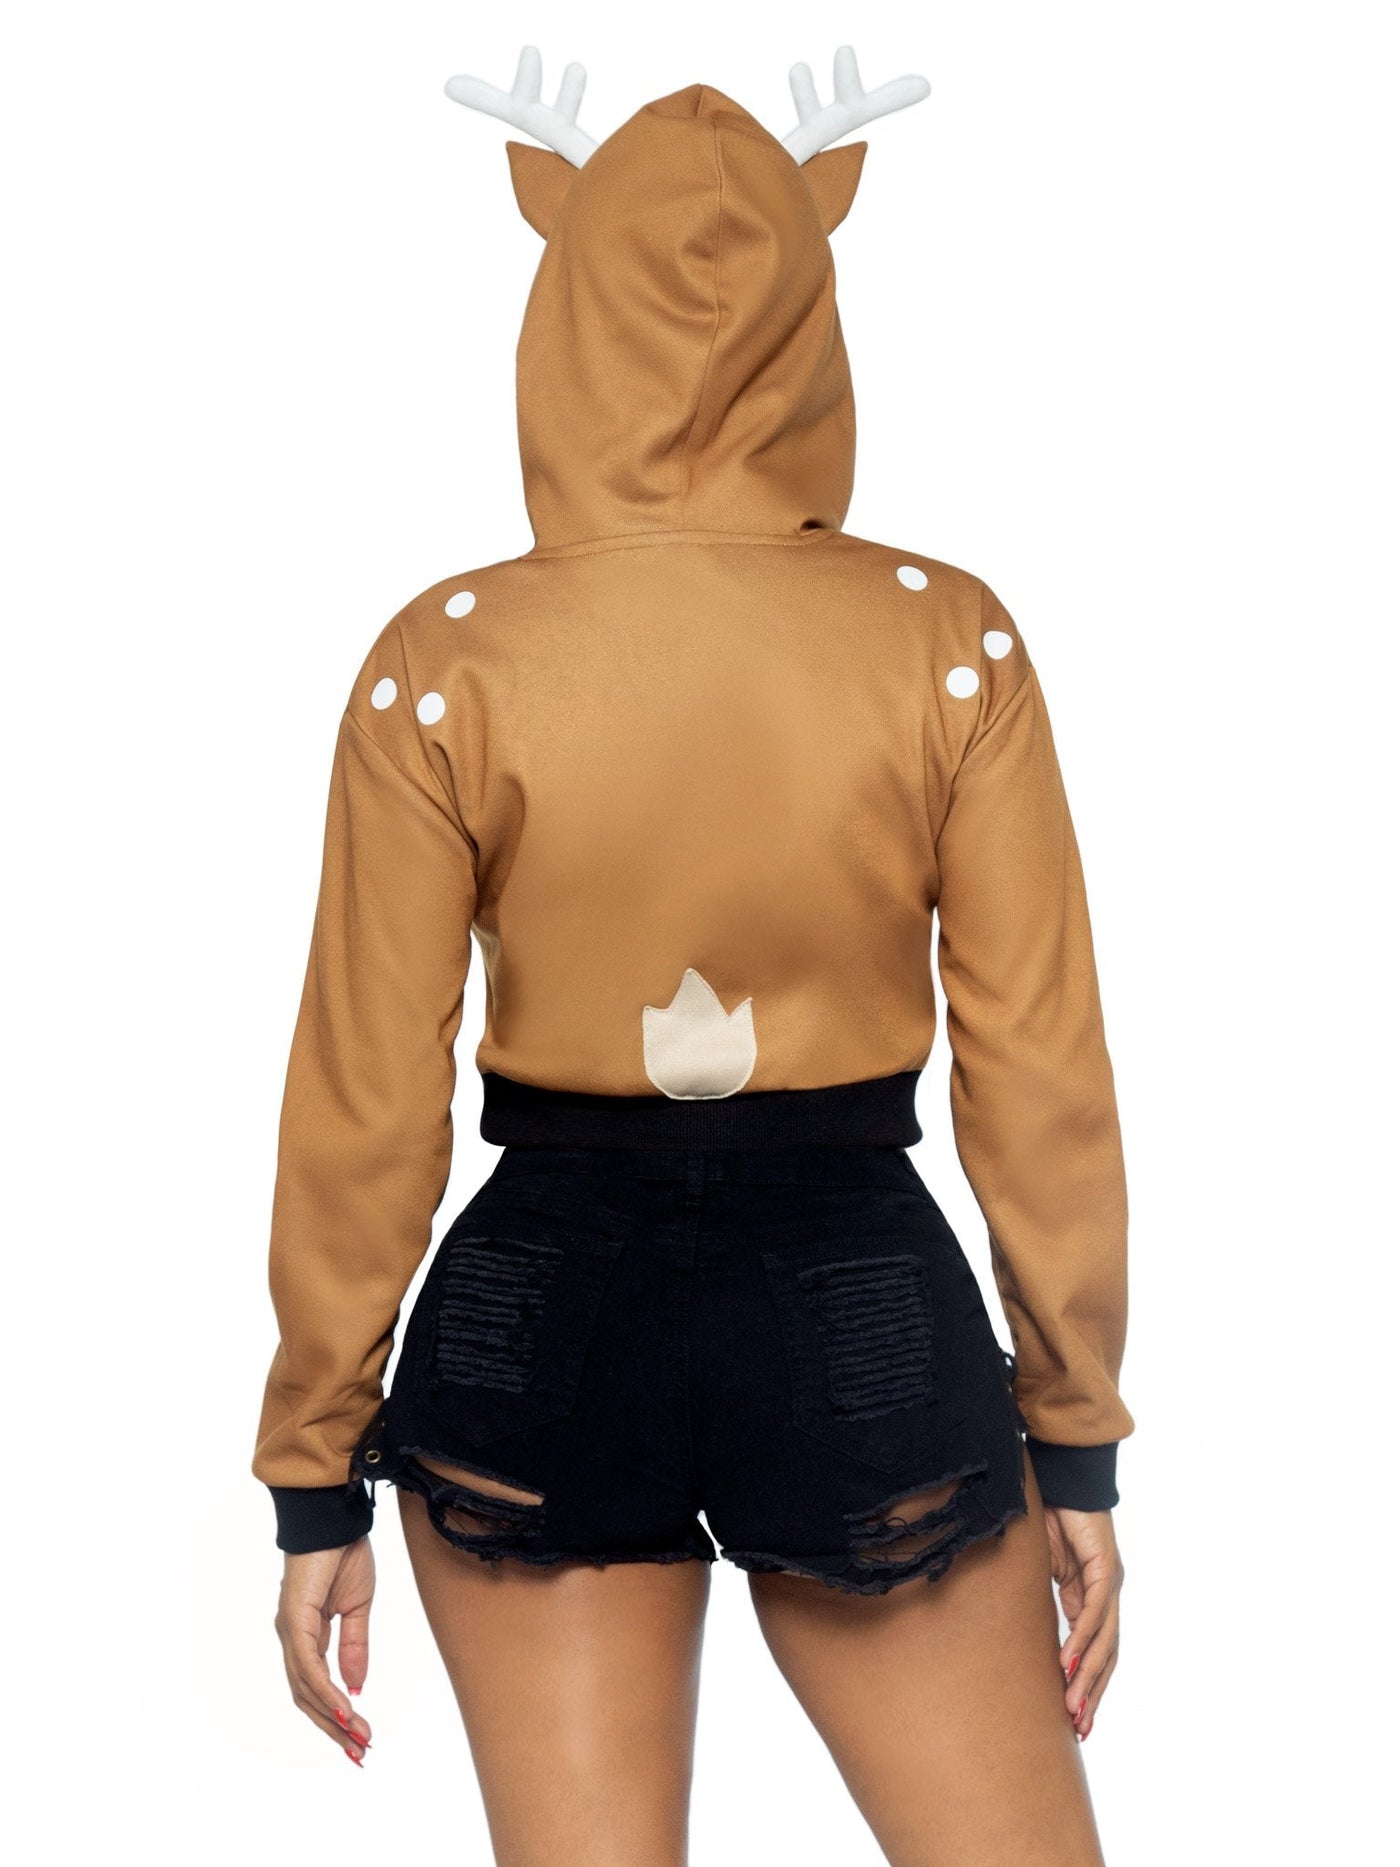 Deer Fawn Cropped Hoodie Costume - JJ's Party House